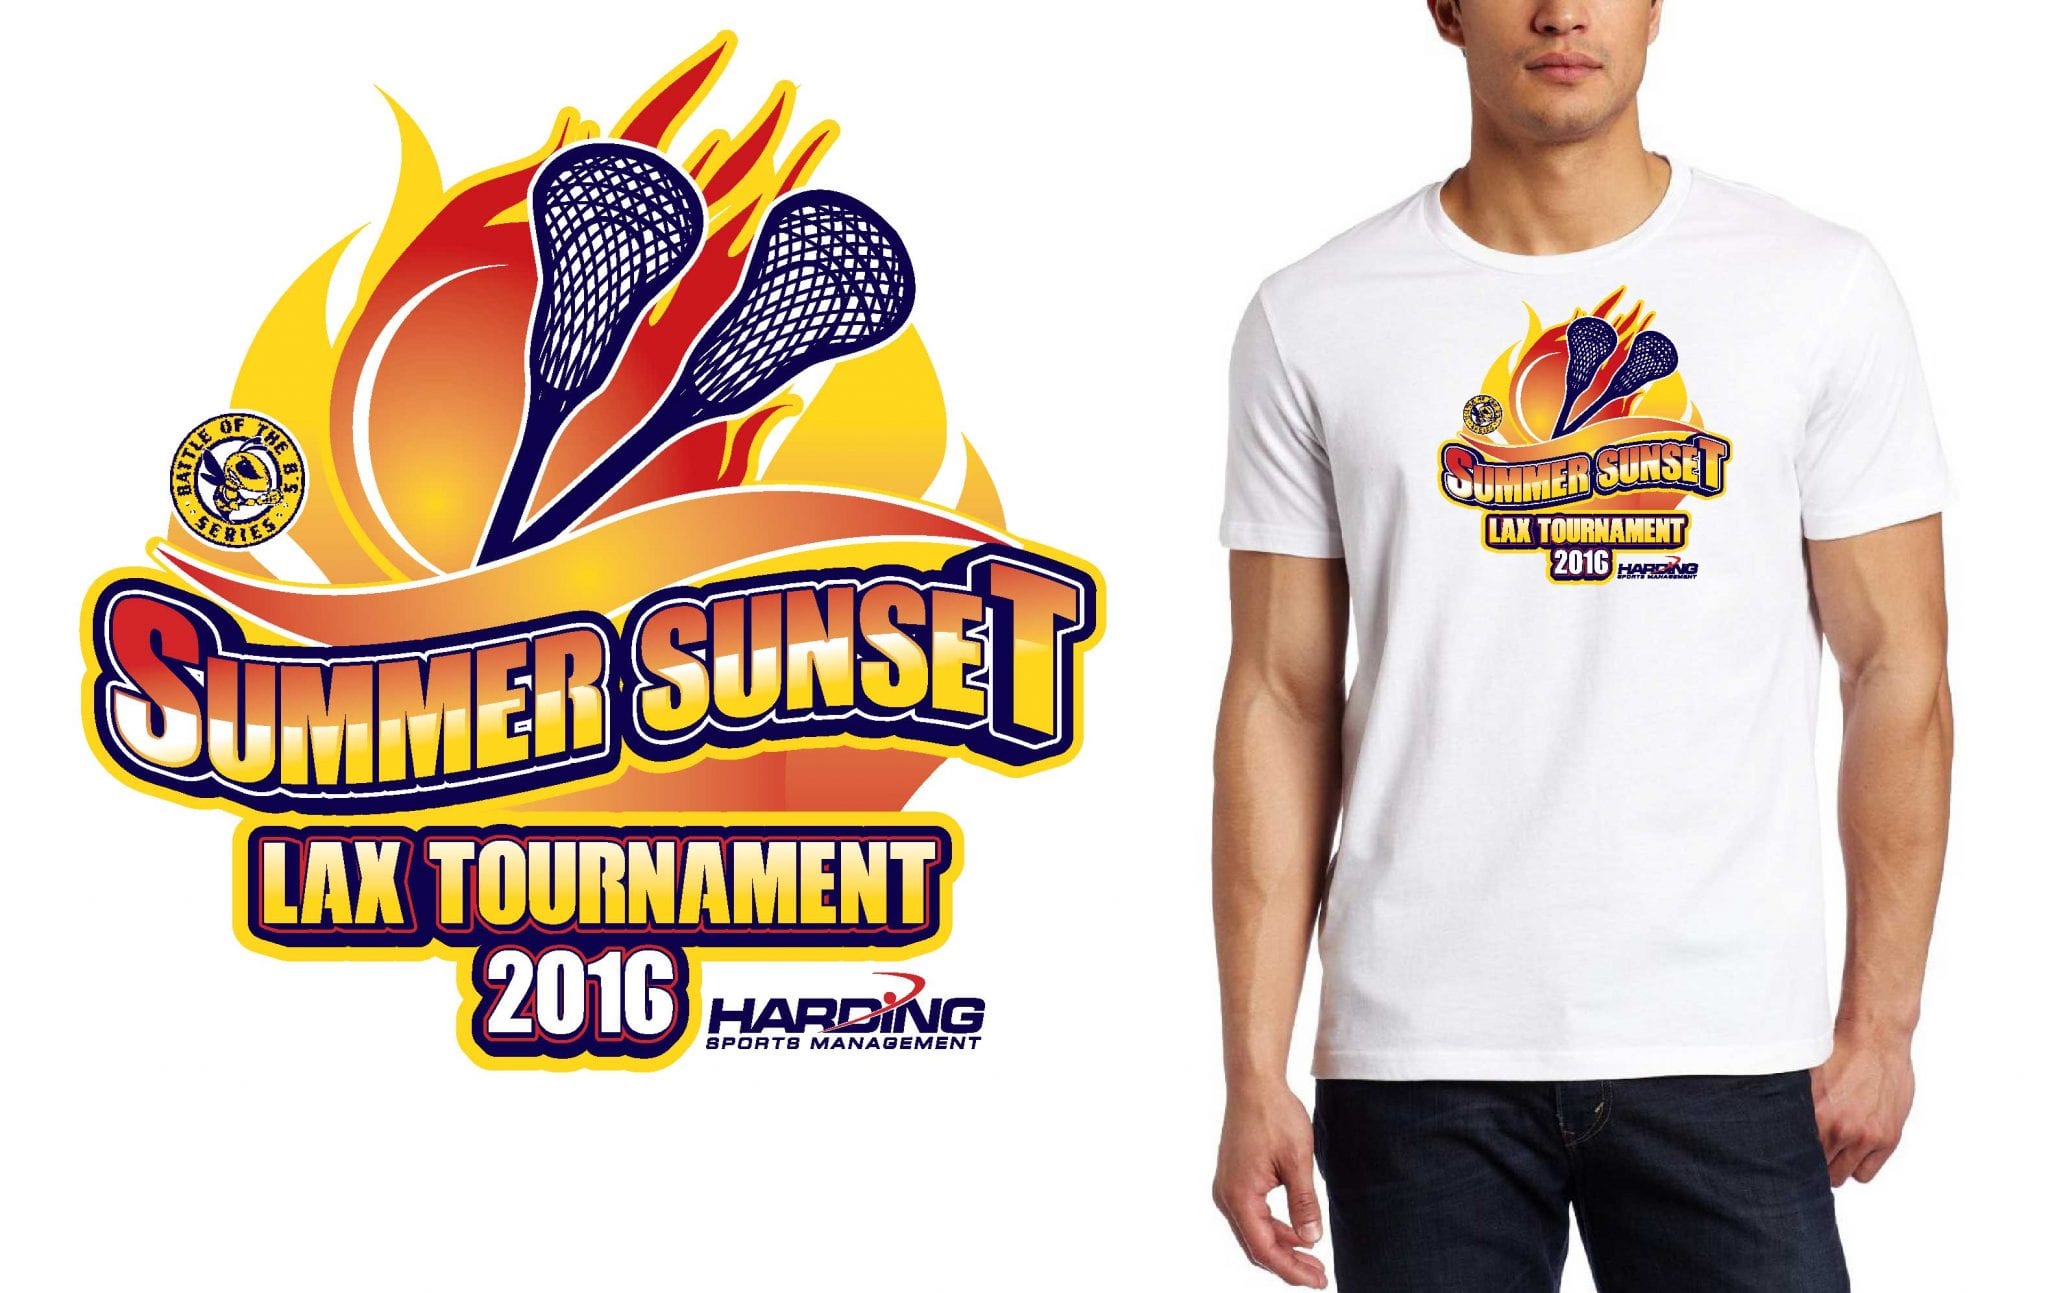 Cool vector logo design for July 23 2016 Summer Sunset Lax Tournament Chuck Greenspan lacrosse event